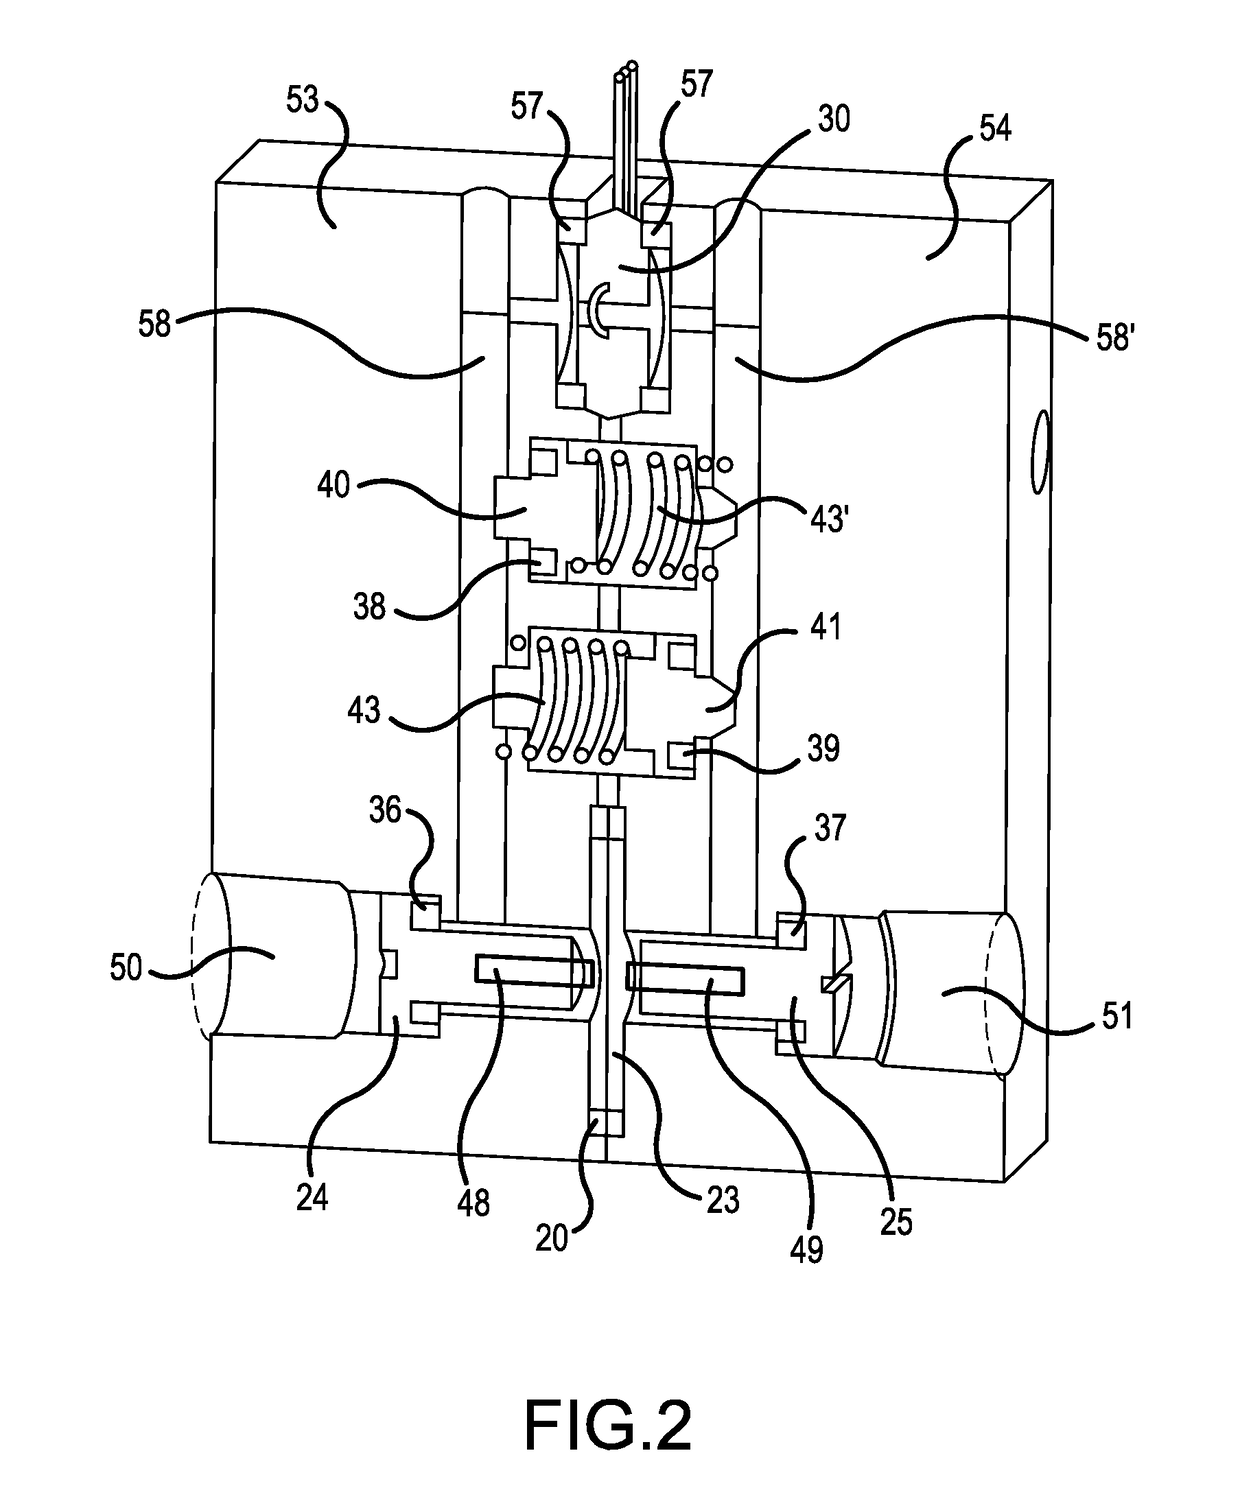 Differential pressure transducer assembly with overload protection